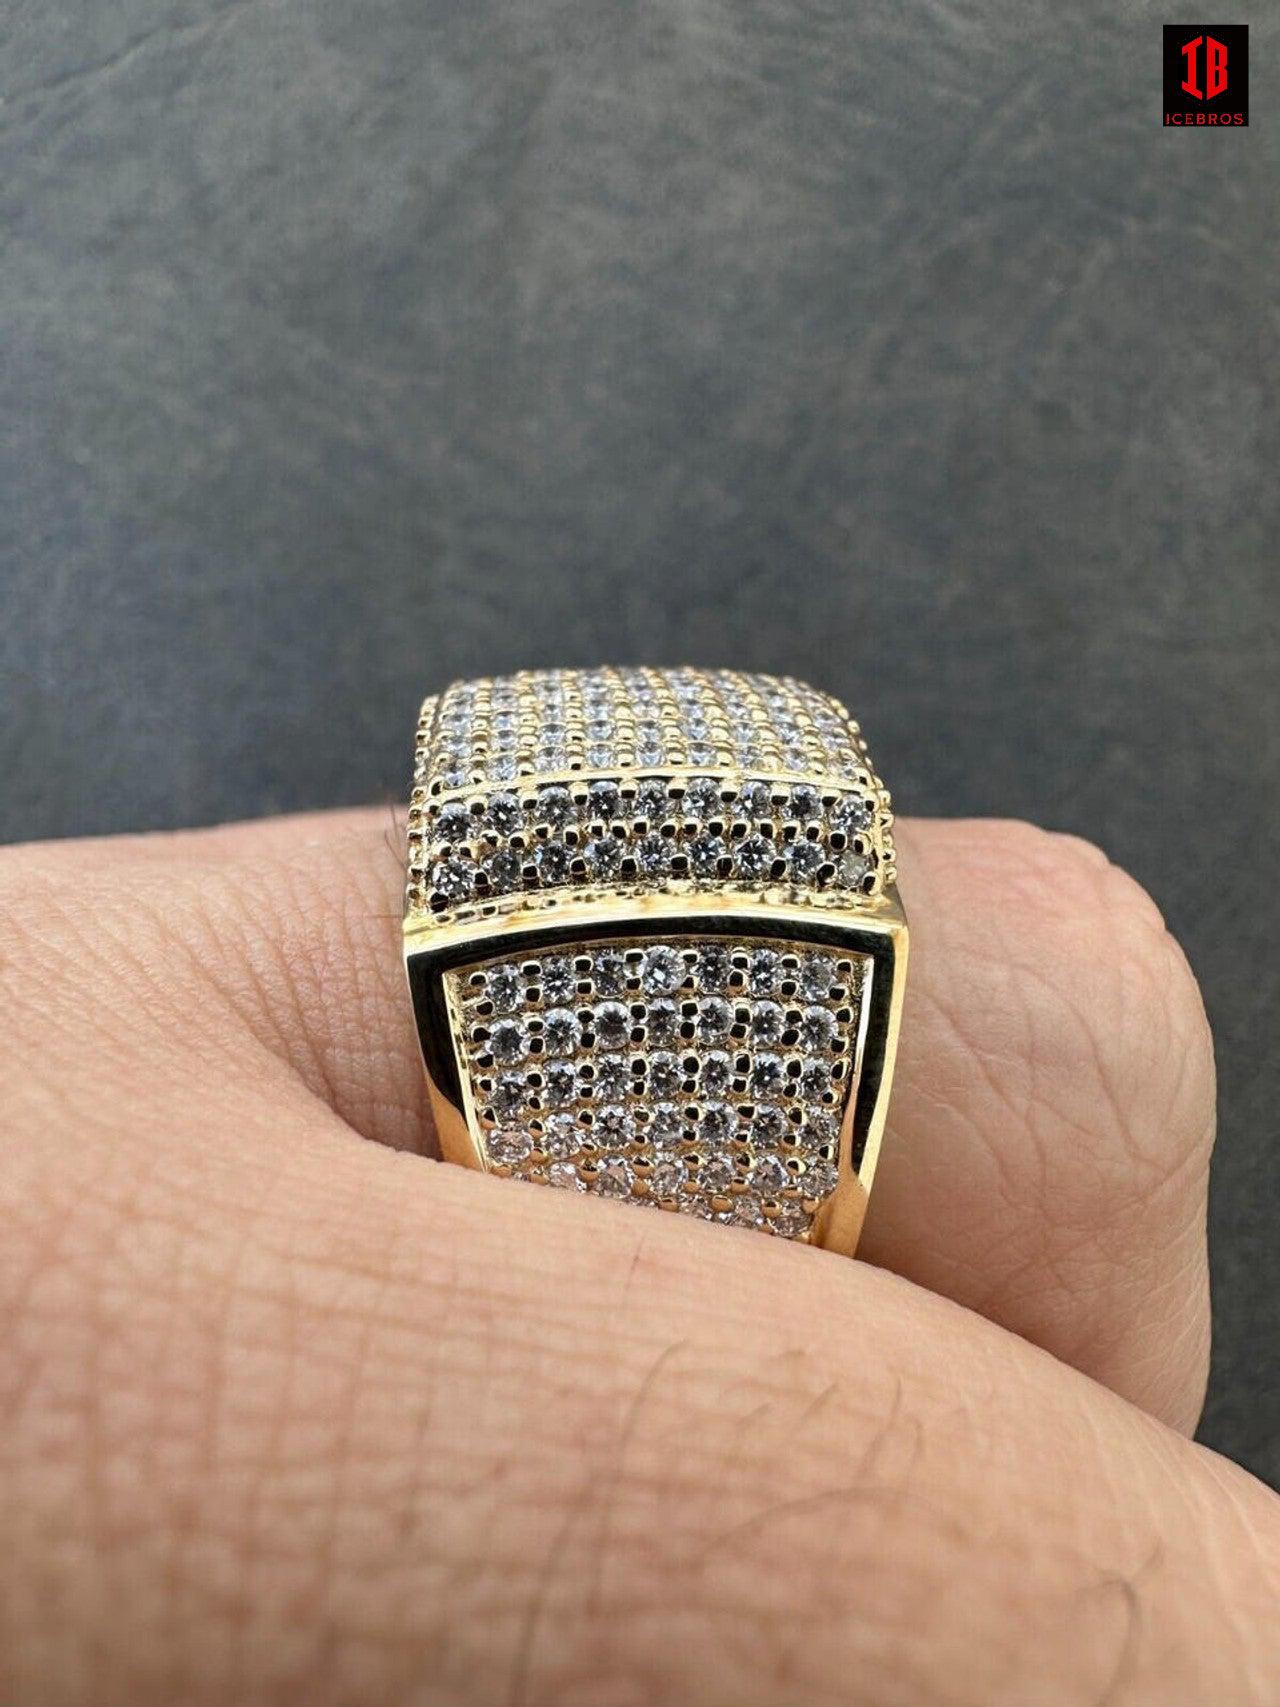 4.49ct Real Diamond Hip Hop 4.49ct Real Diamond Hip Hop Solid 14k White Gold Iced Square Micropave Ring 14g